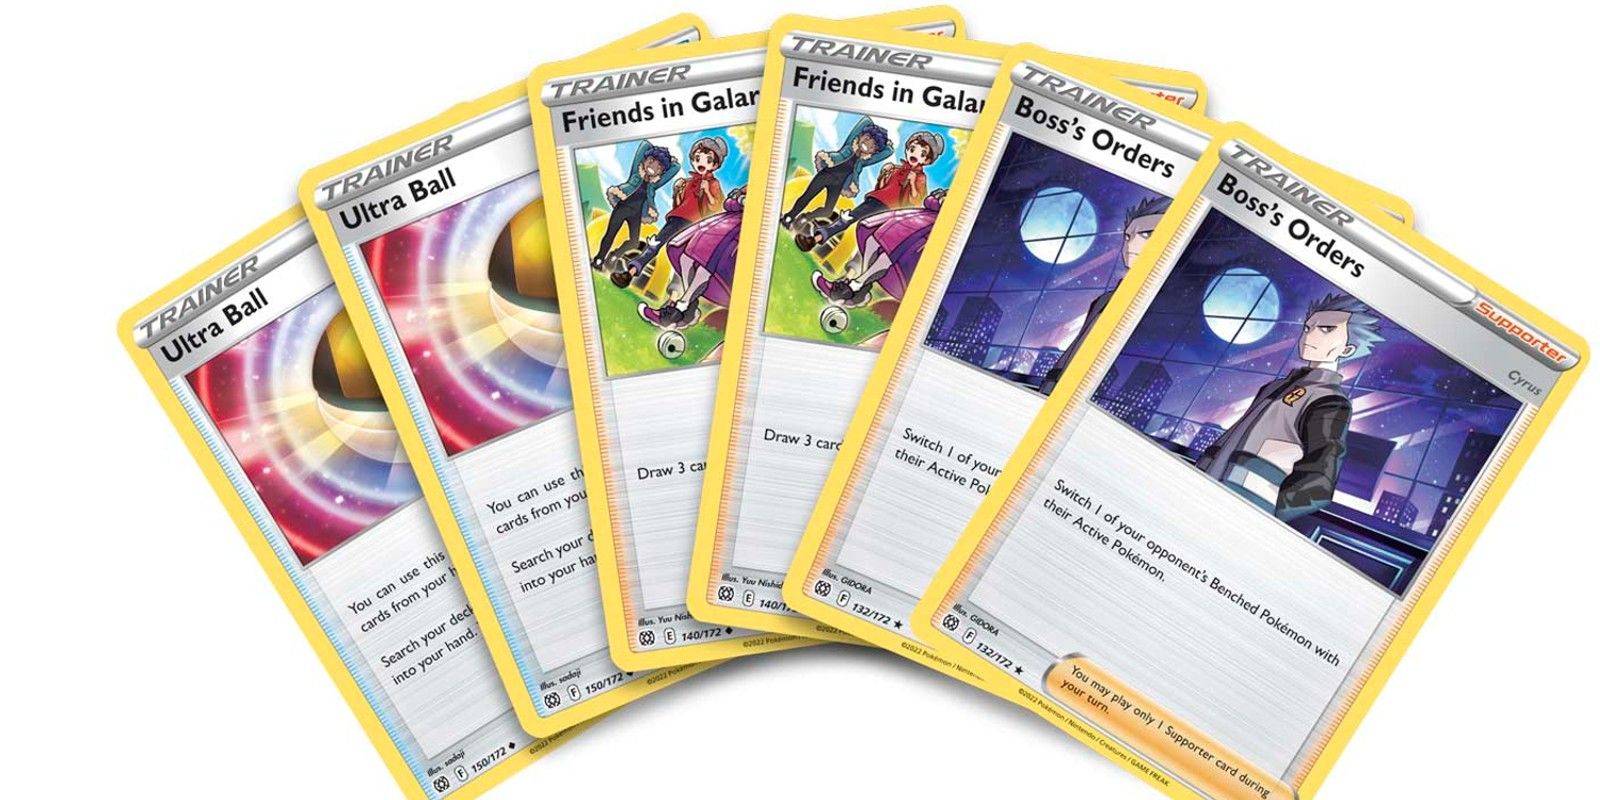 Image of each of the additional trainer cards that are included in the exclusive bundle version of both V Battle Decks. From left to right: two Ultra Balls, two Friends in Galar, and two Boss's Orders 